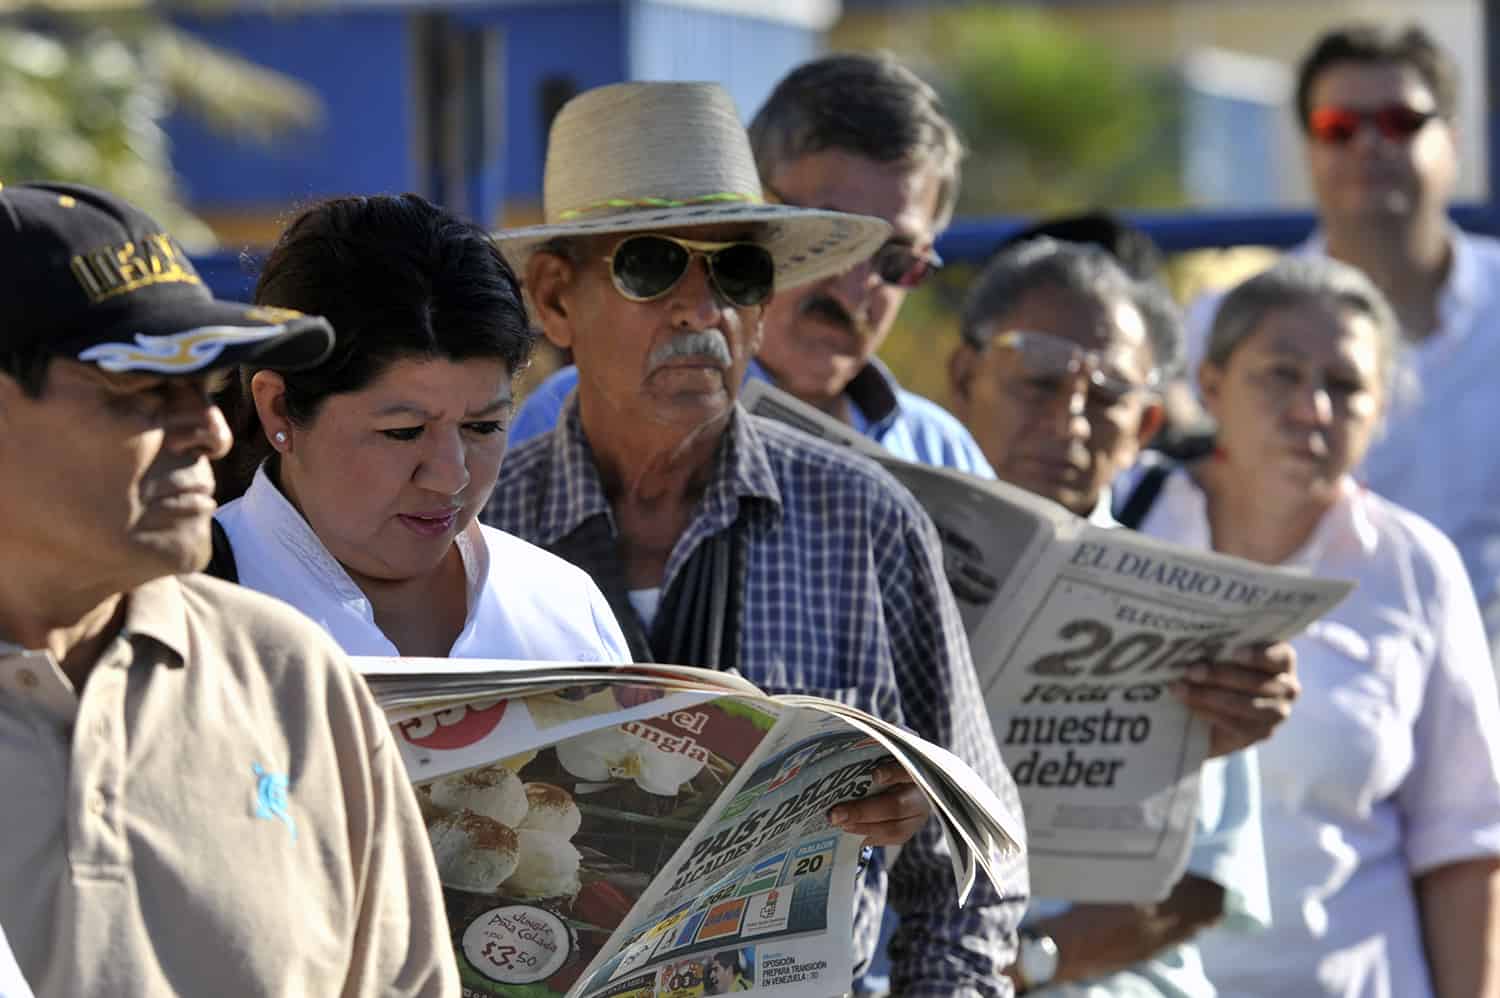 Citizens queue to vote during legislative and municipal elections on March 1, 2015 in San Salvador.